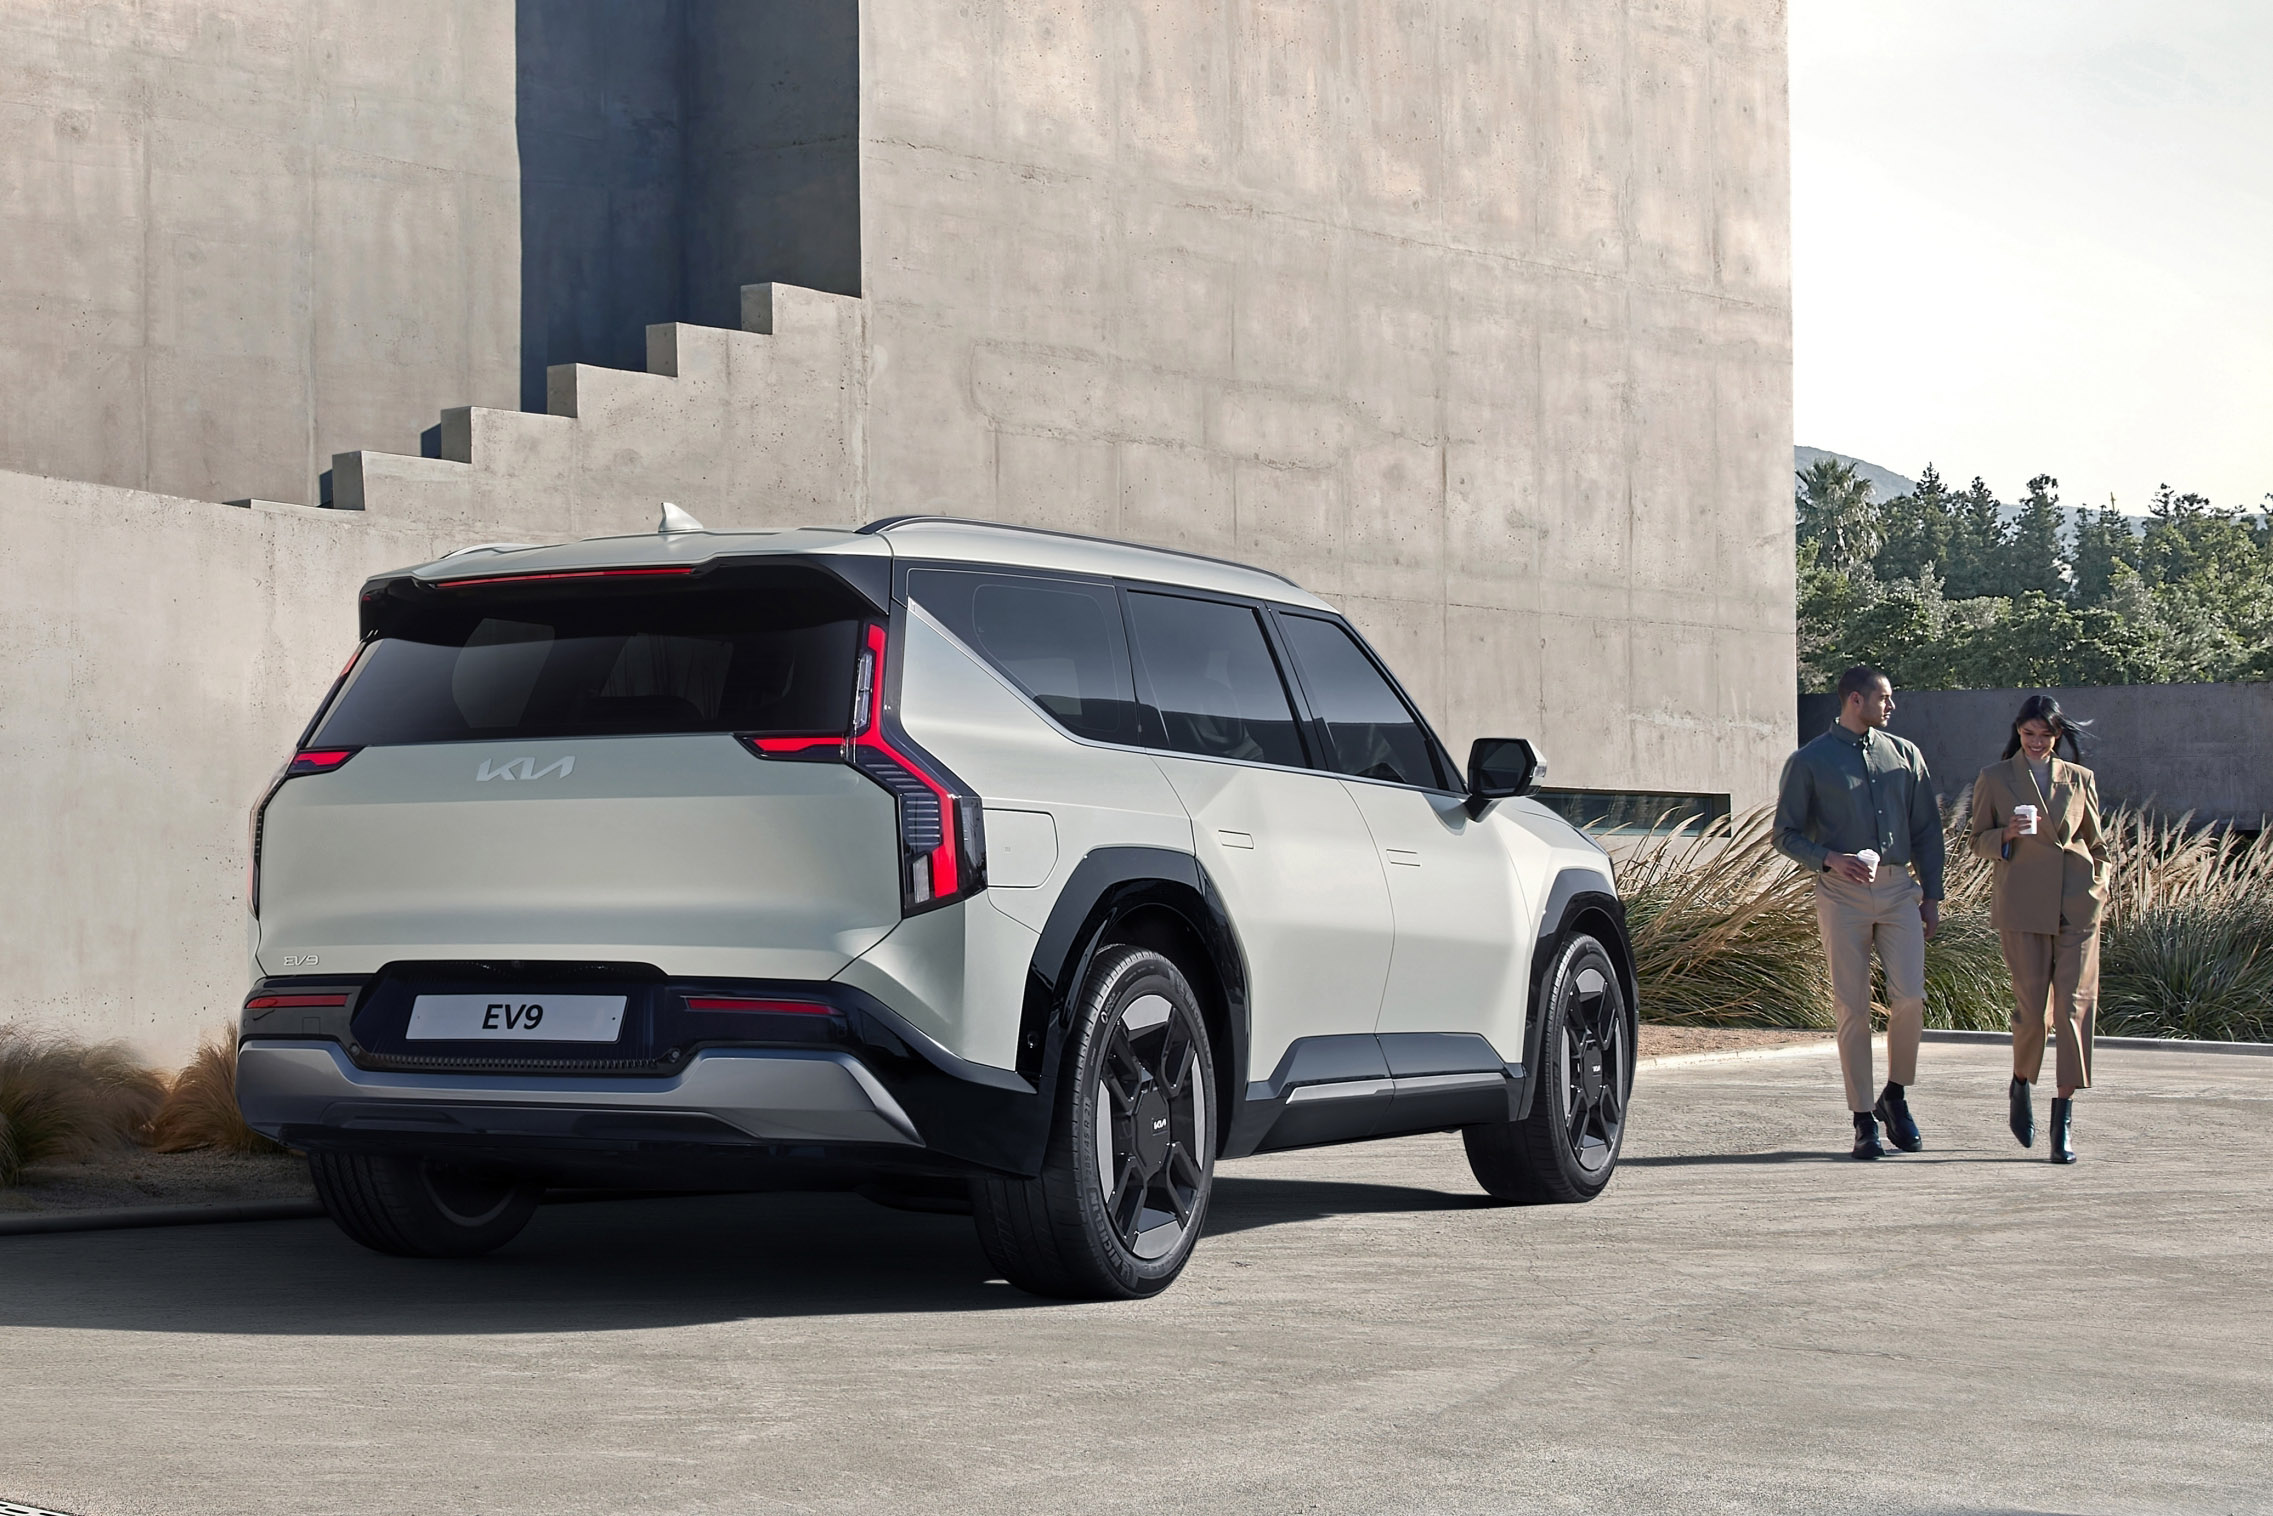 Kia unveils the EV9 electric SUV with three rows of seats